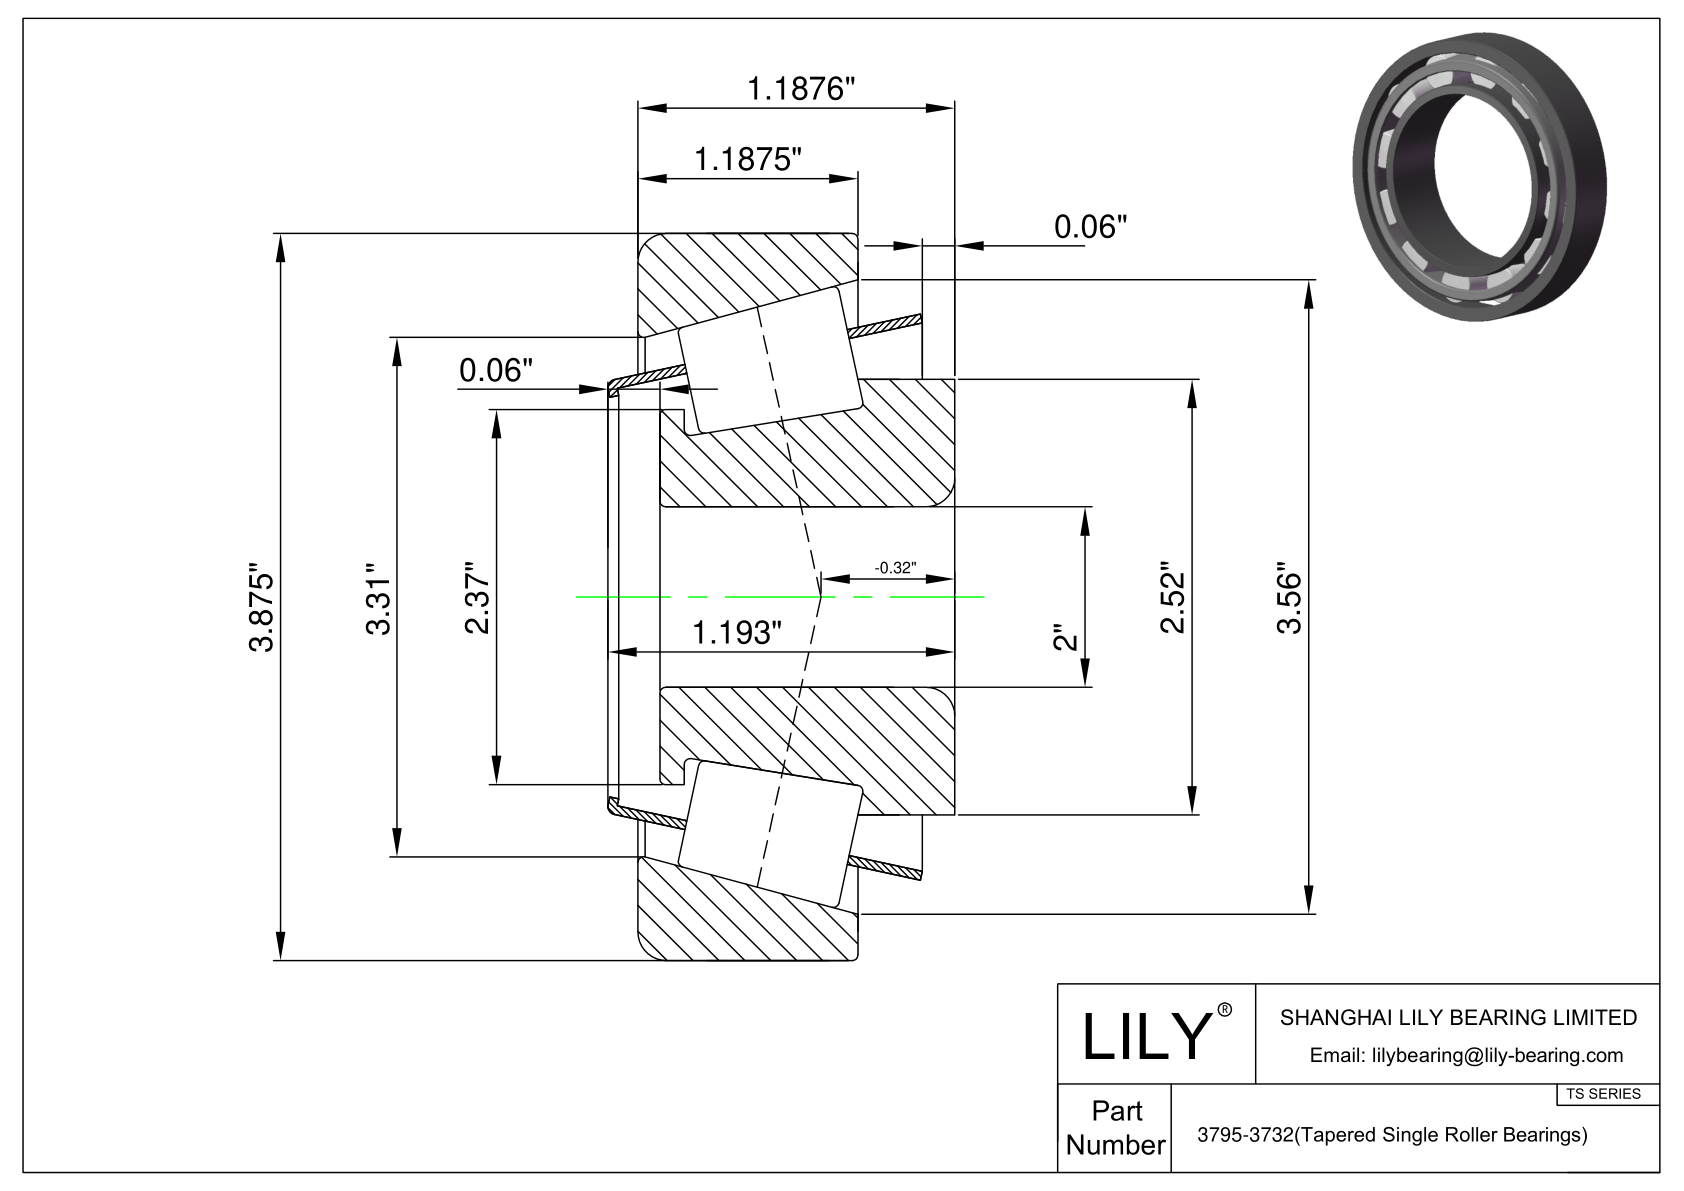 3795-3732 TS (Tapered Single Roller Bearings) (Imperial) cad drawing